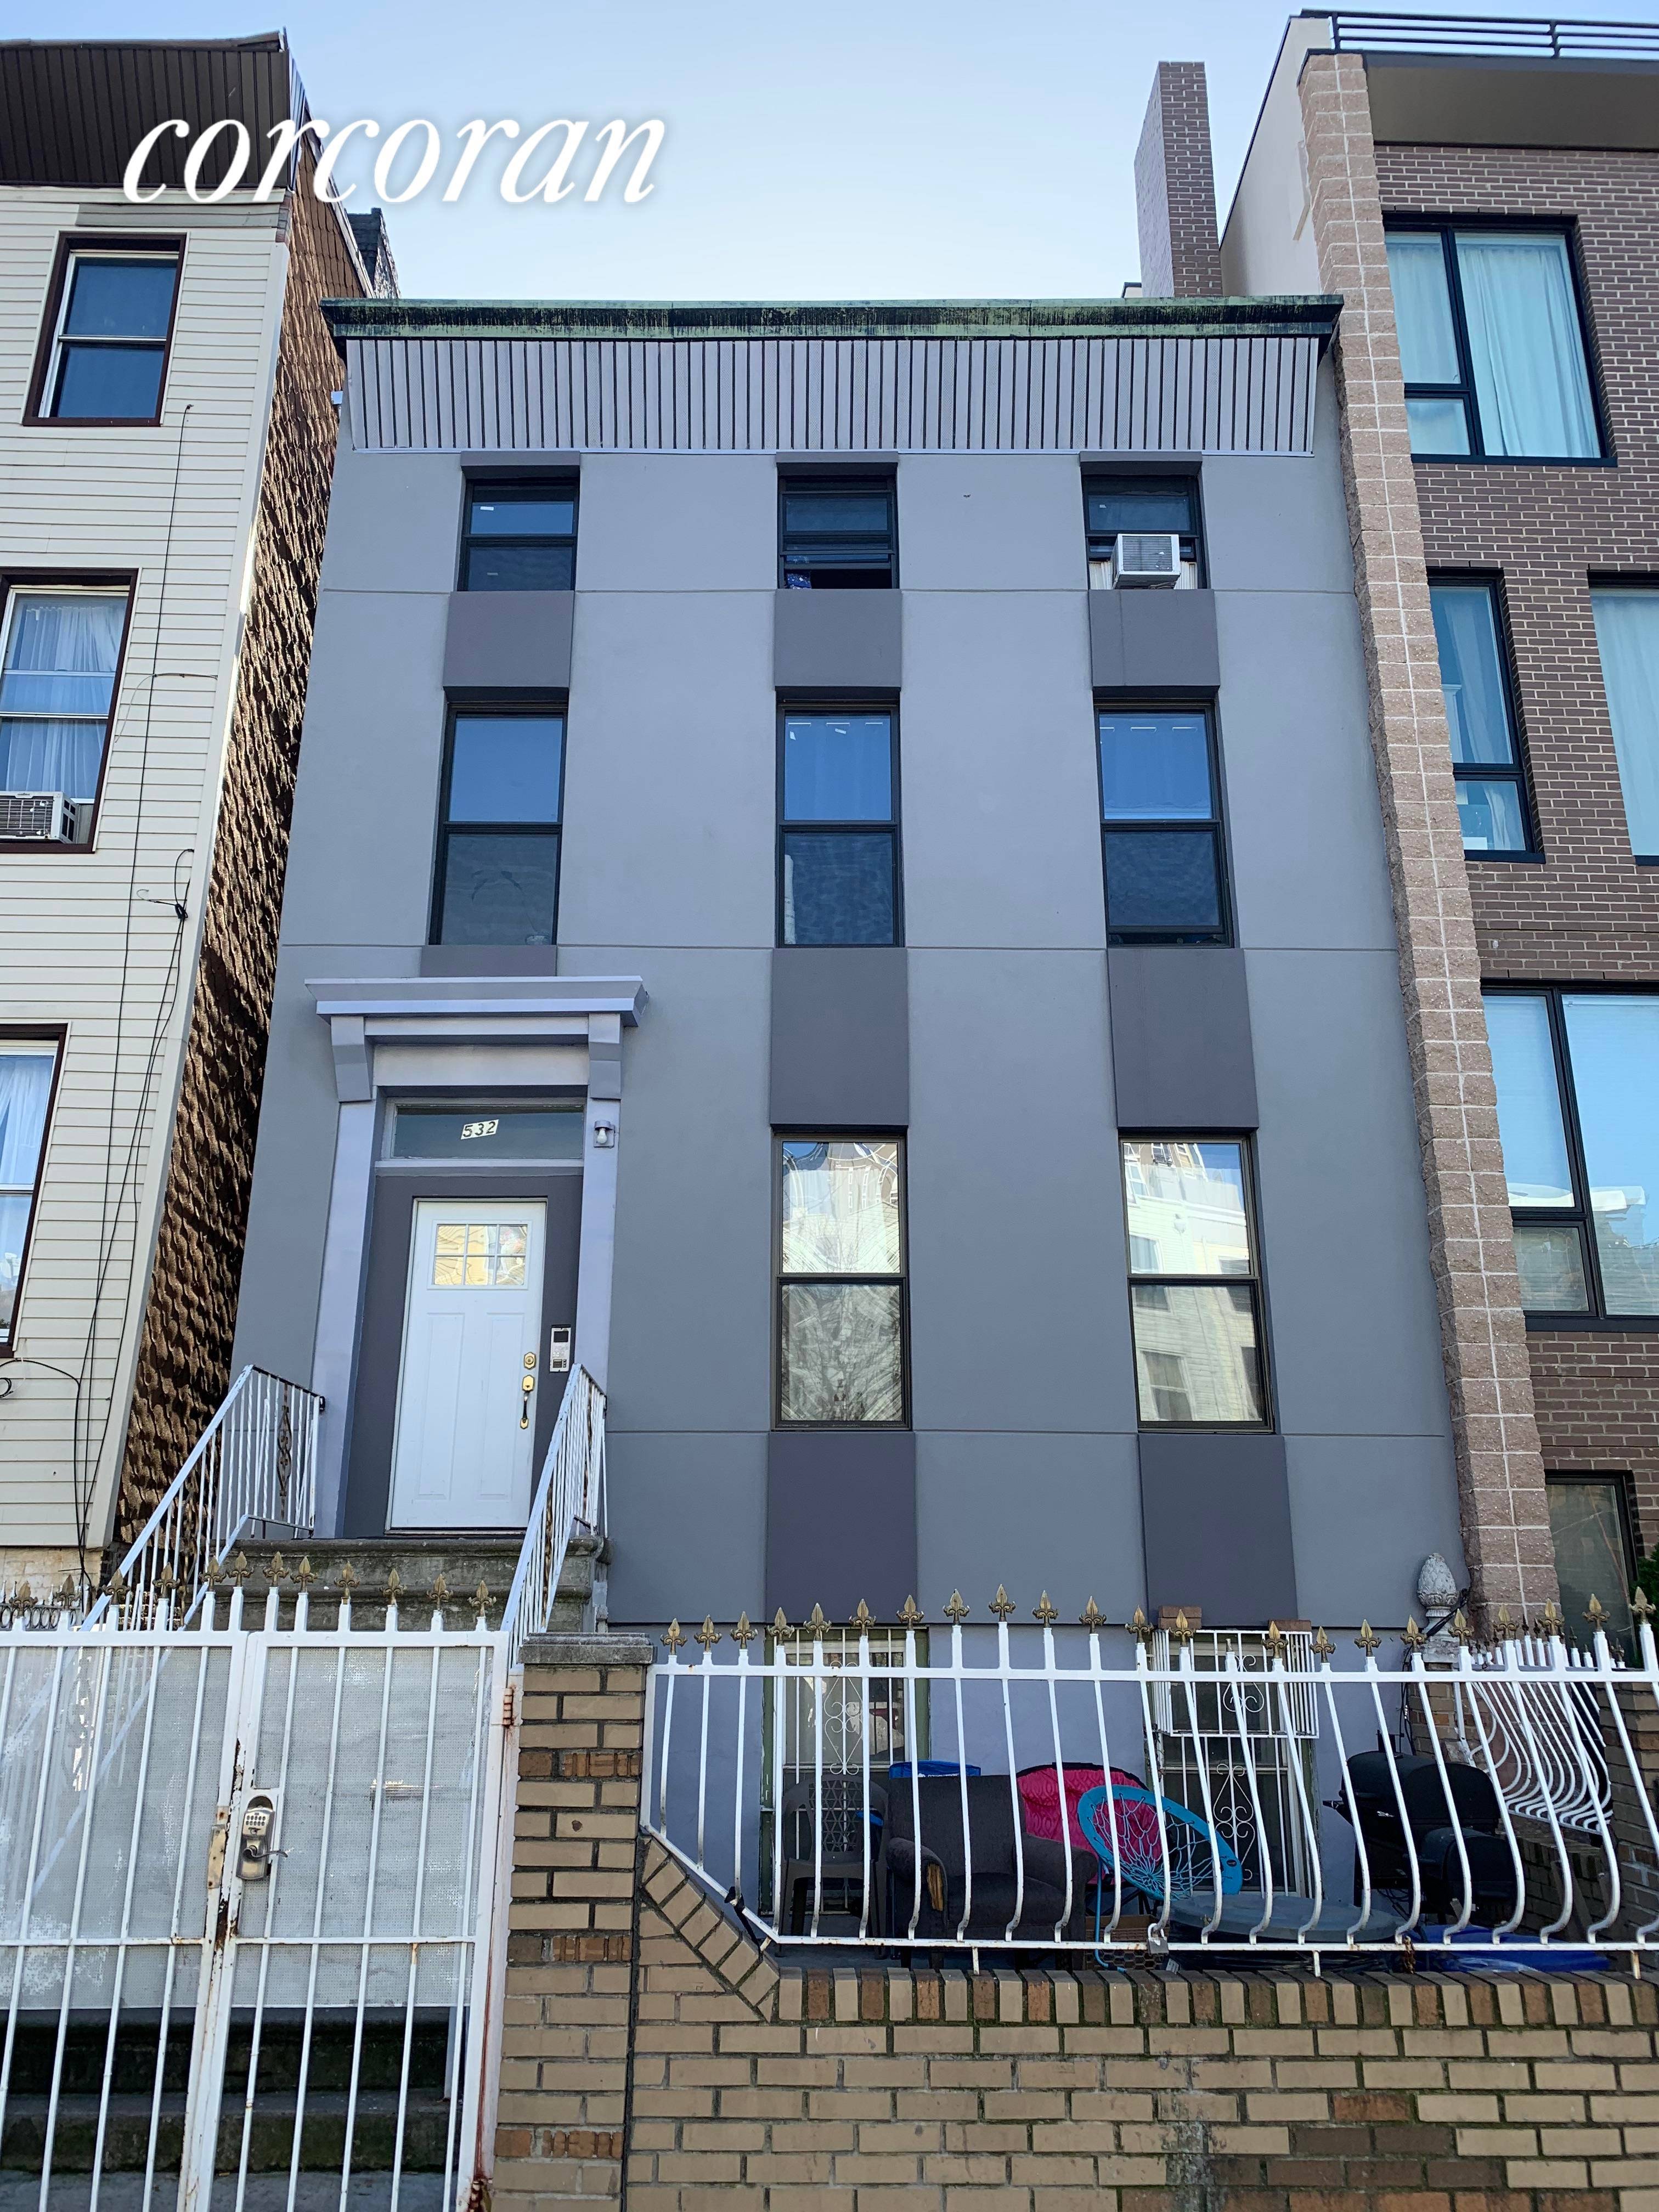 Welcome to 532 Lafayette Ave, a beautiful 3 unit semi detached townhouse in prime Bed Stuy.